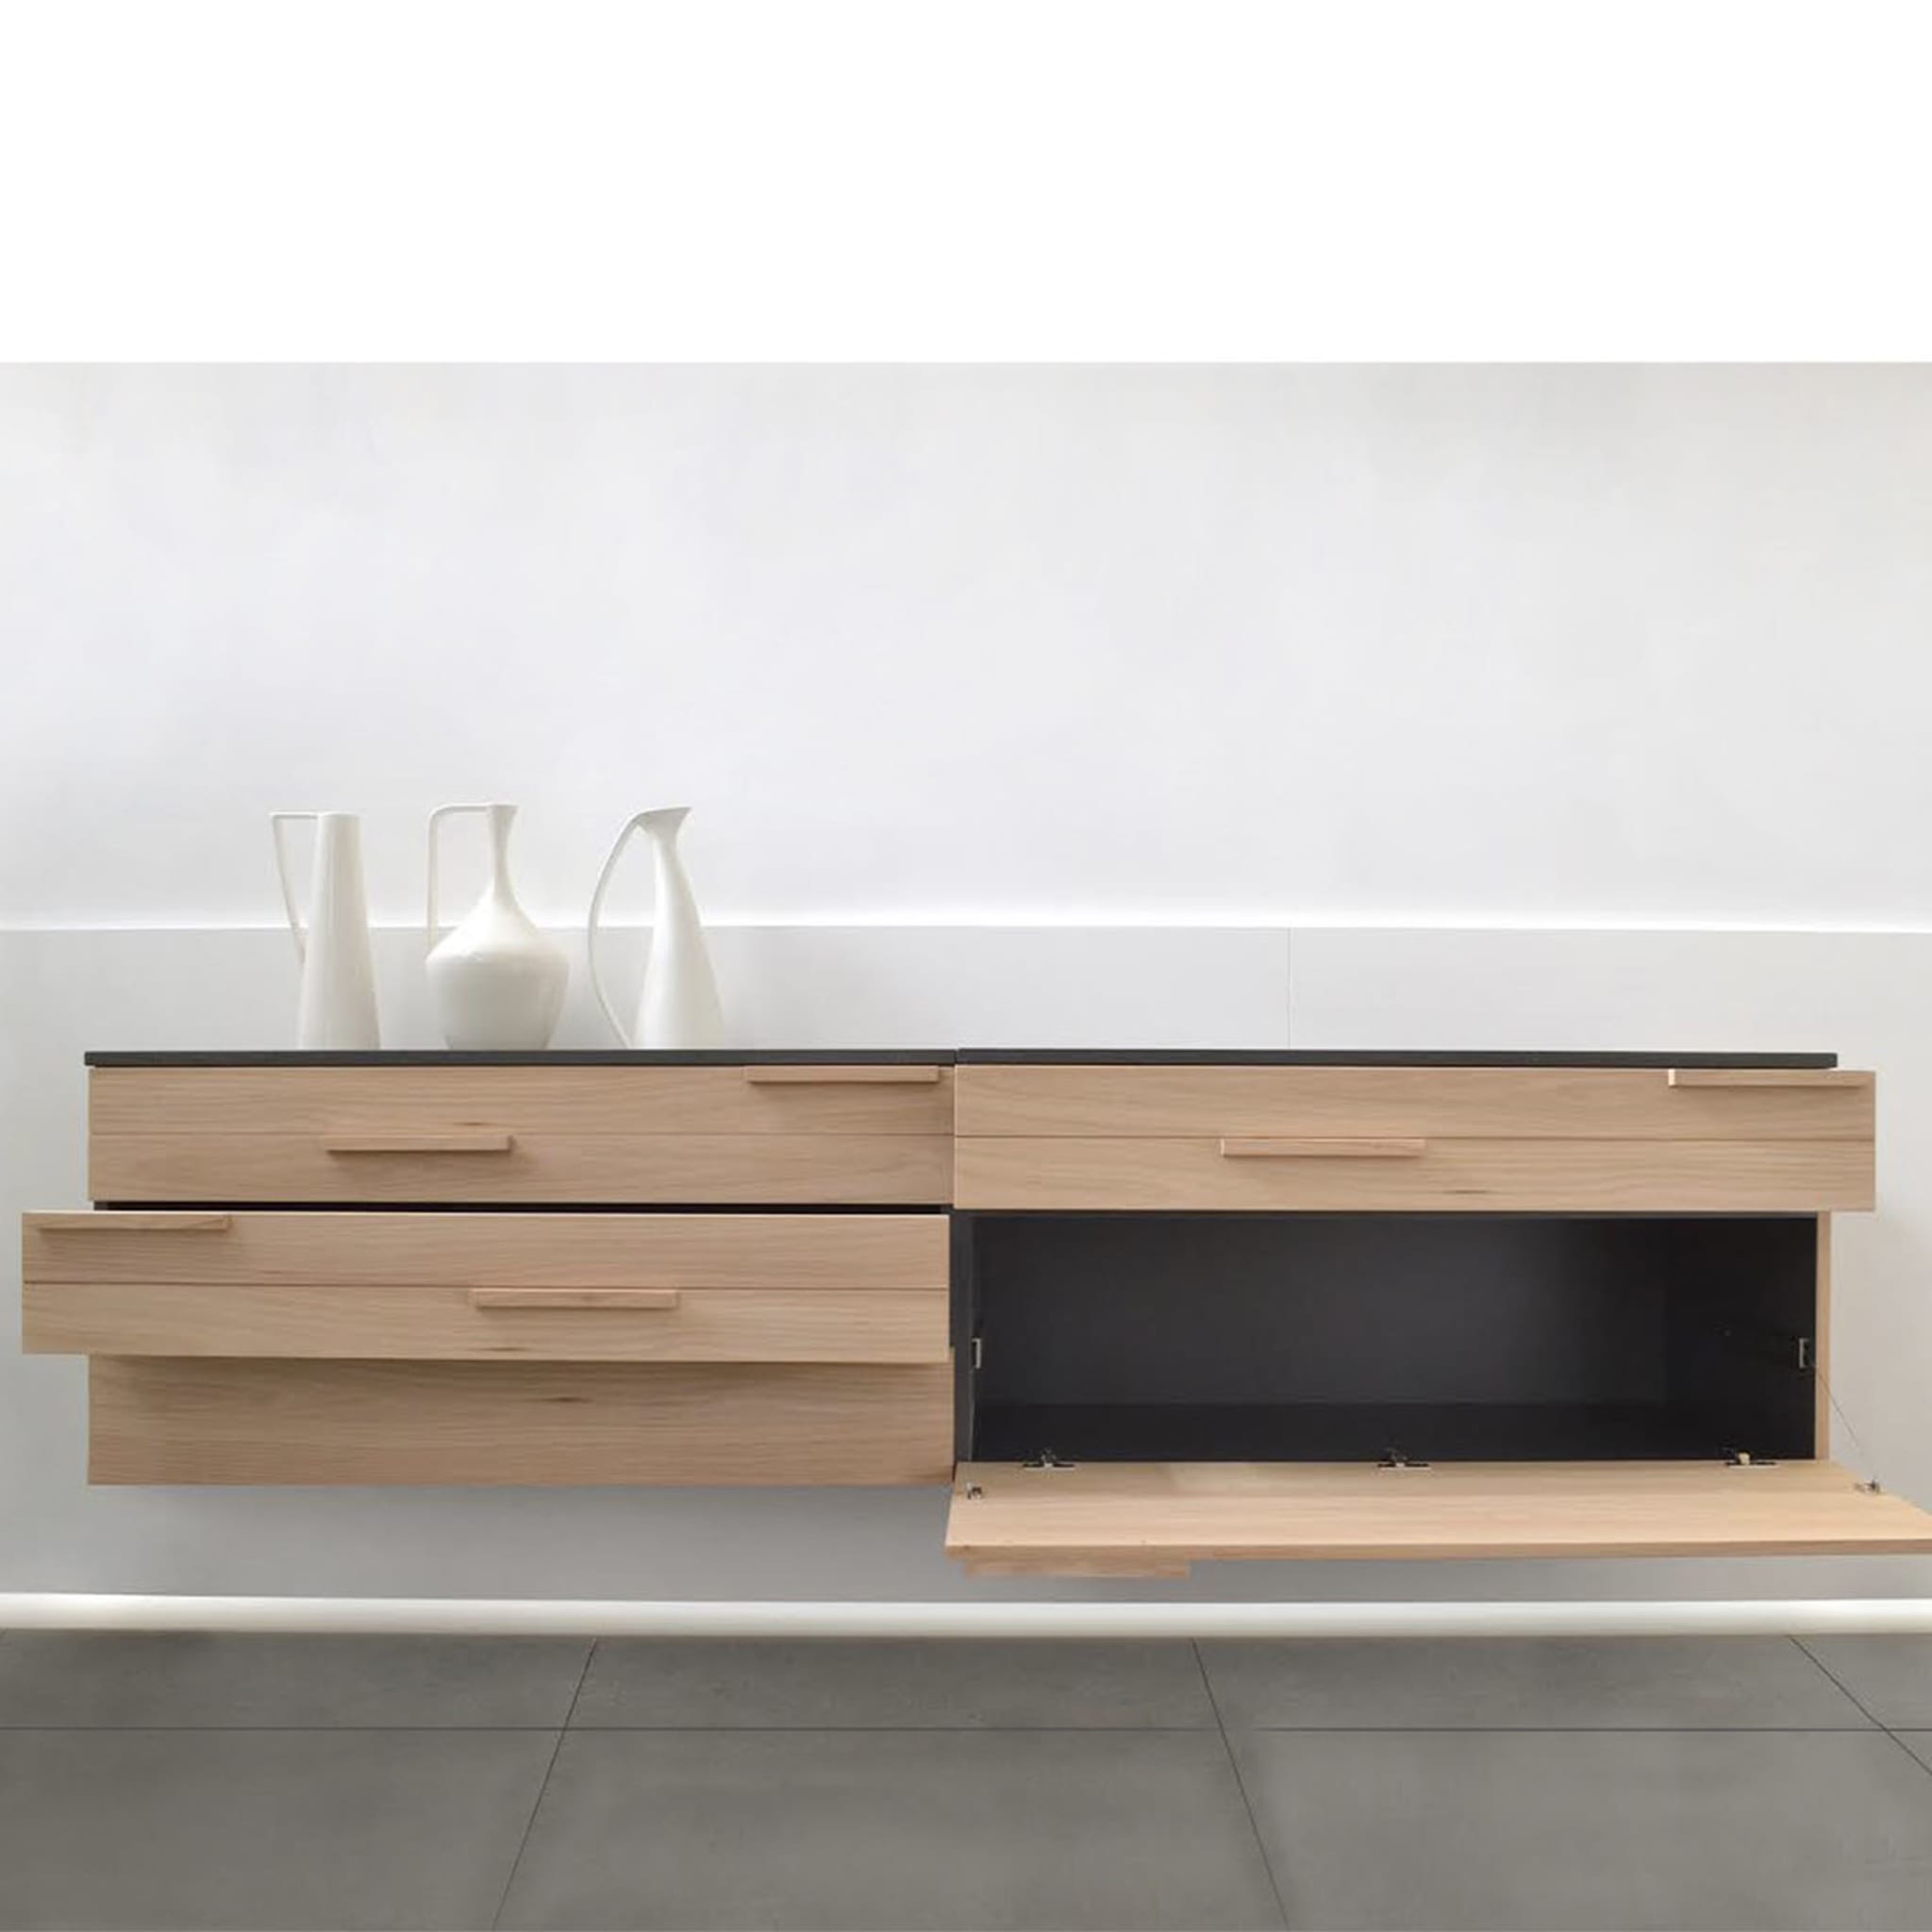 Benedetta Natural Chest of Drawers - Alternative view 2